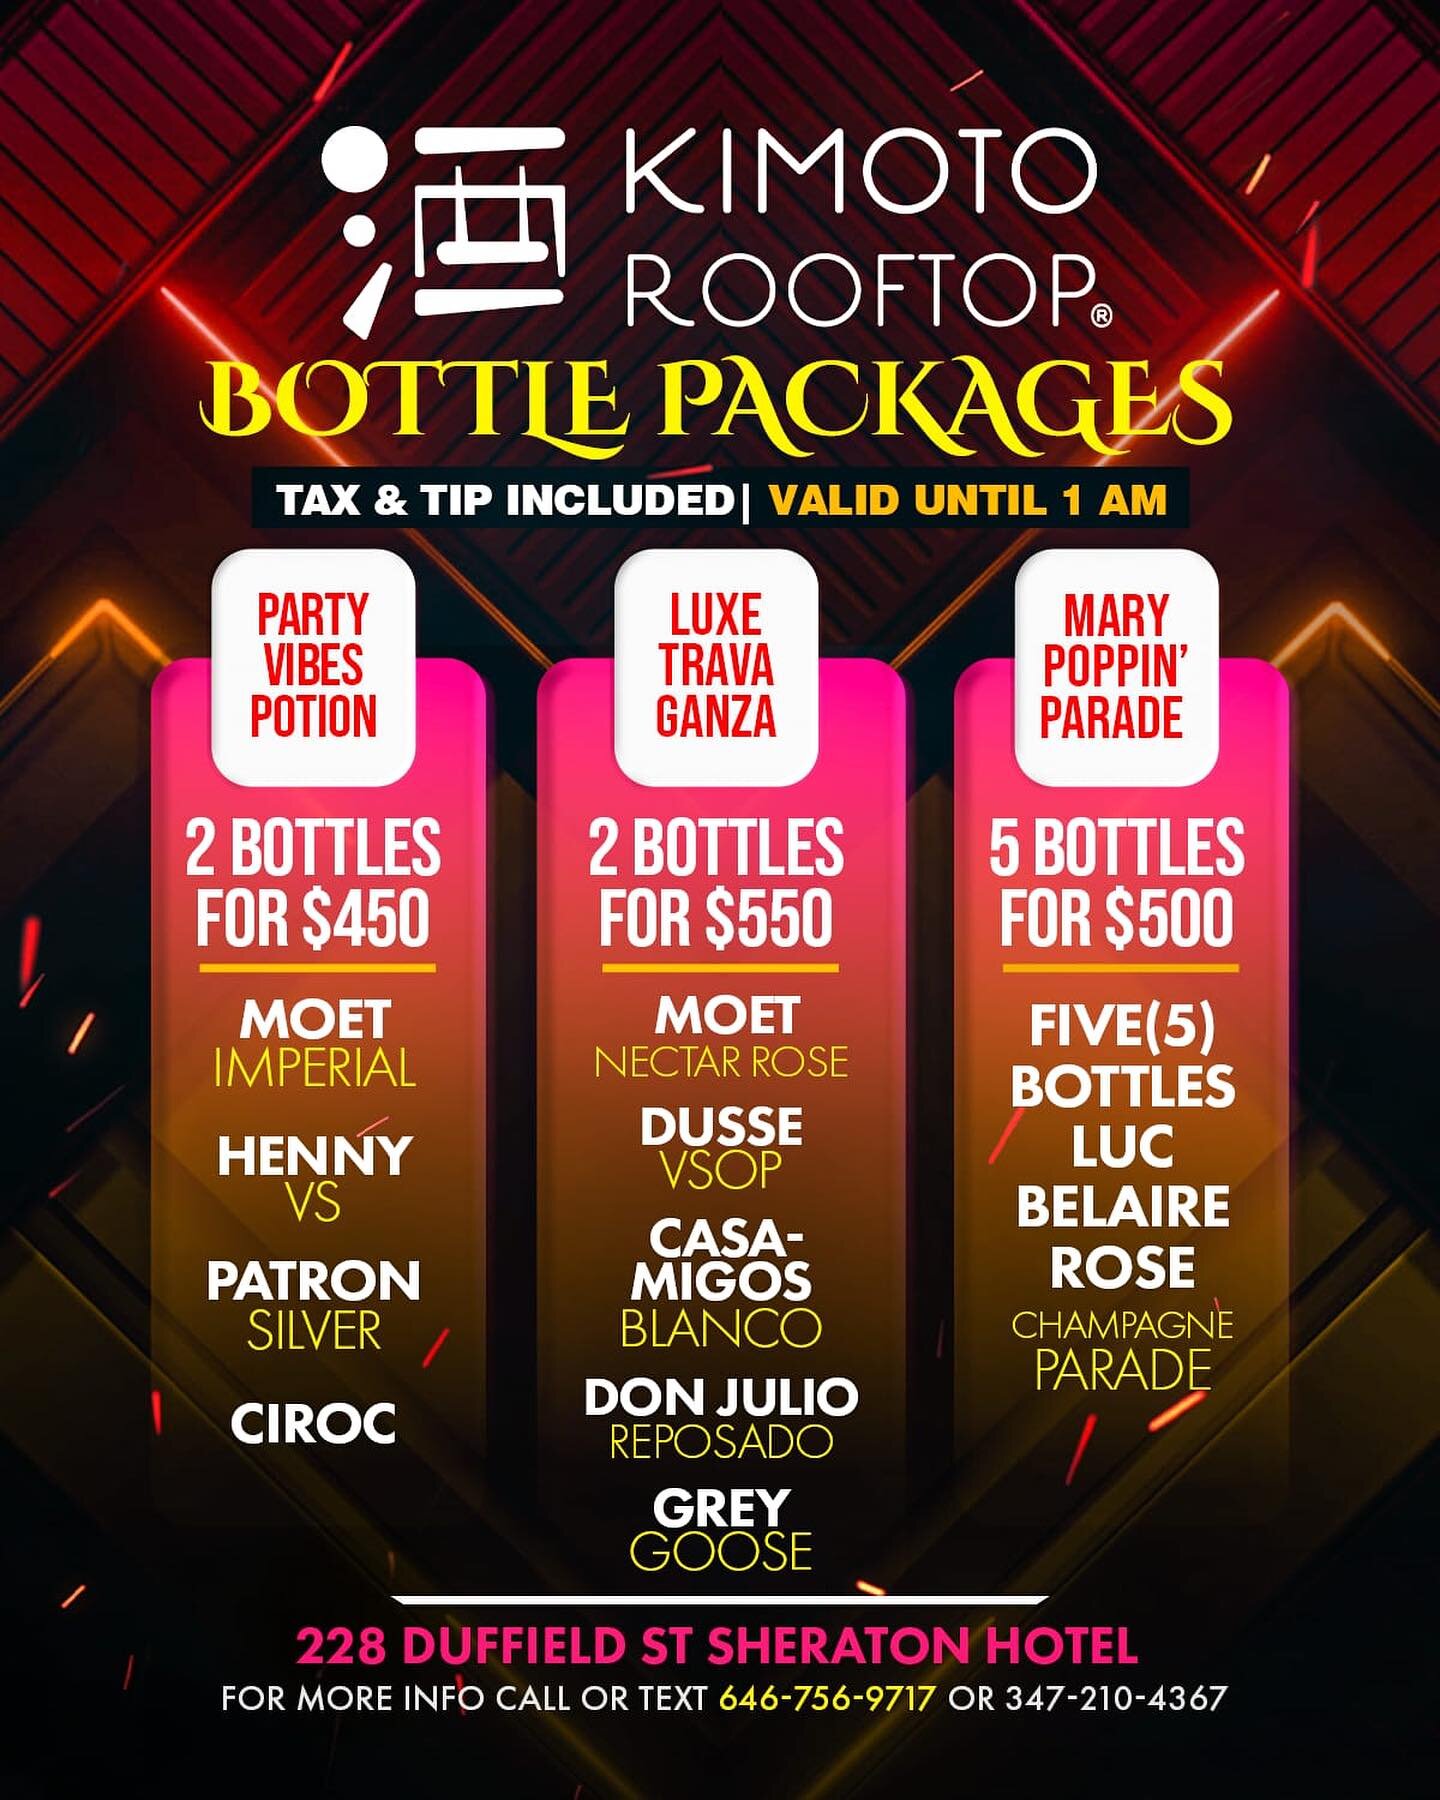 Brooklyn&rsquo;s favorite rooftop just got even better. introducing our new bottle specials for any occasion.You know Kimoto is known for its vibrant atmosphere and stunning views, now offers an array of discounted bottles for those seeking an elevat